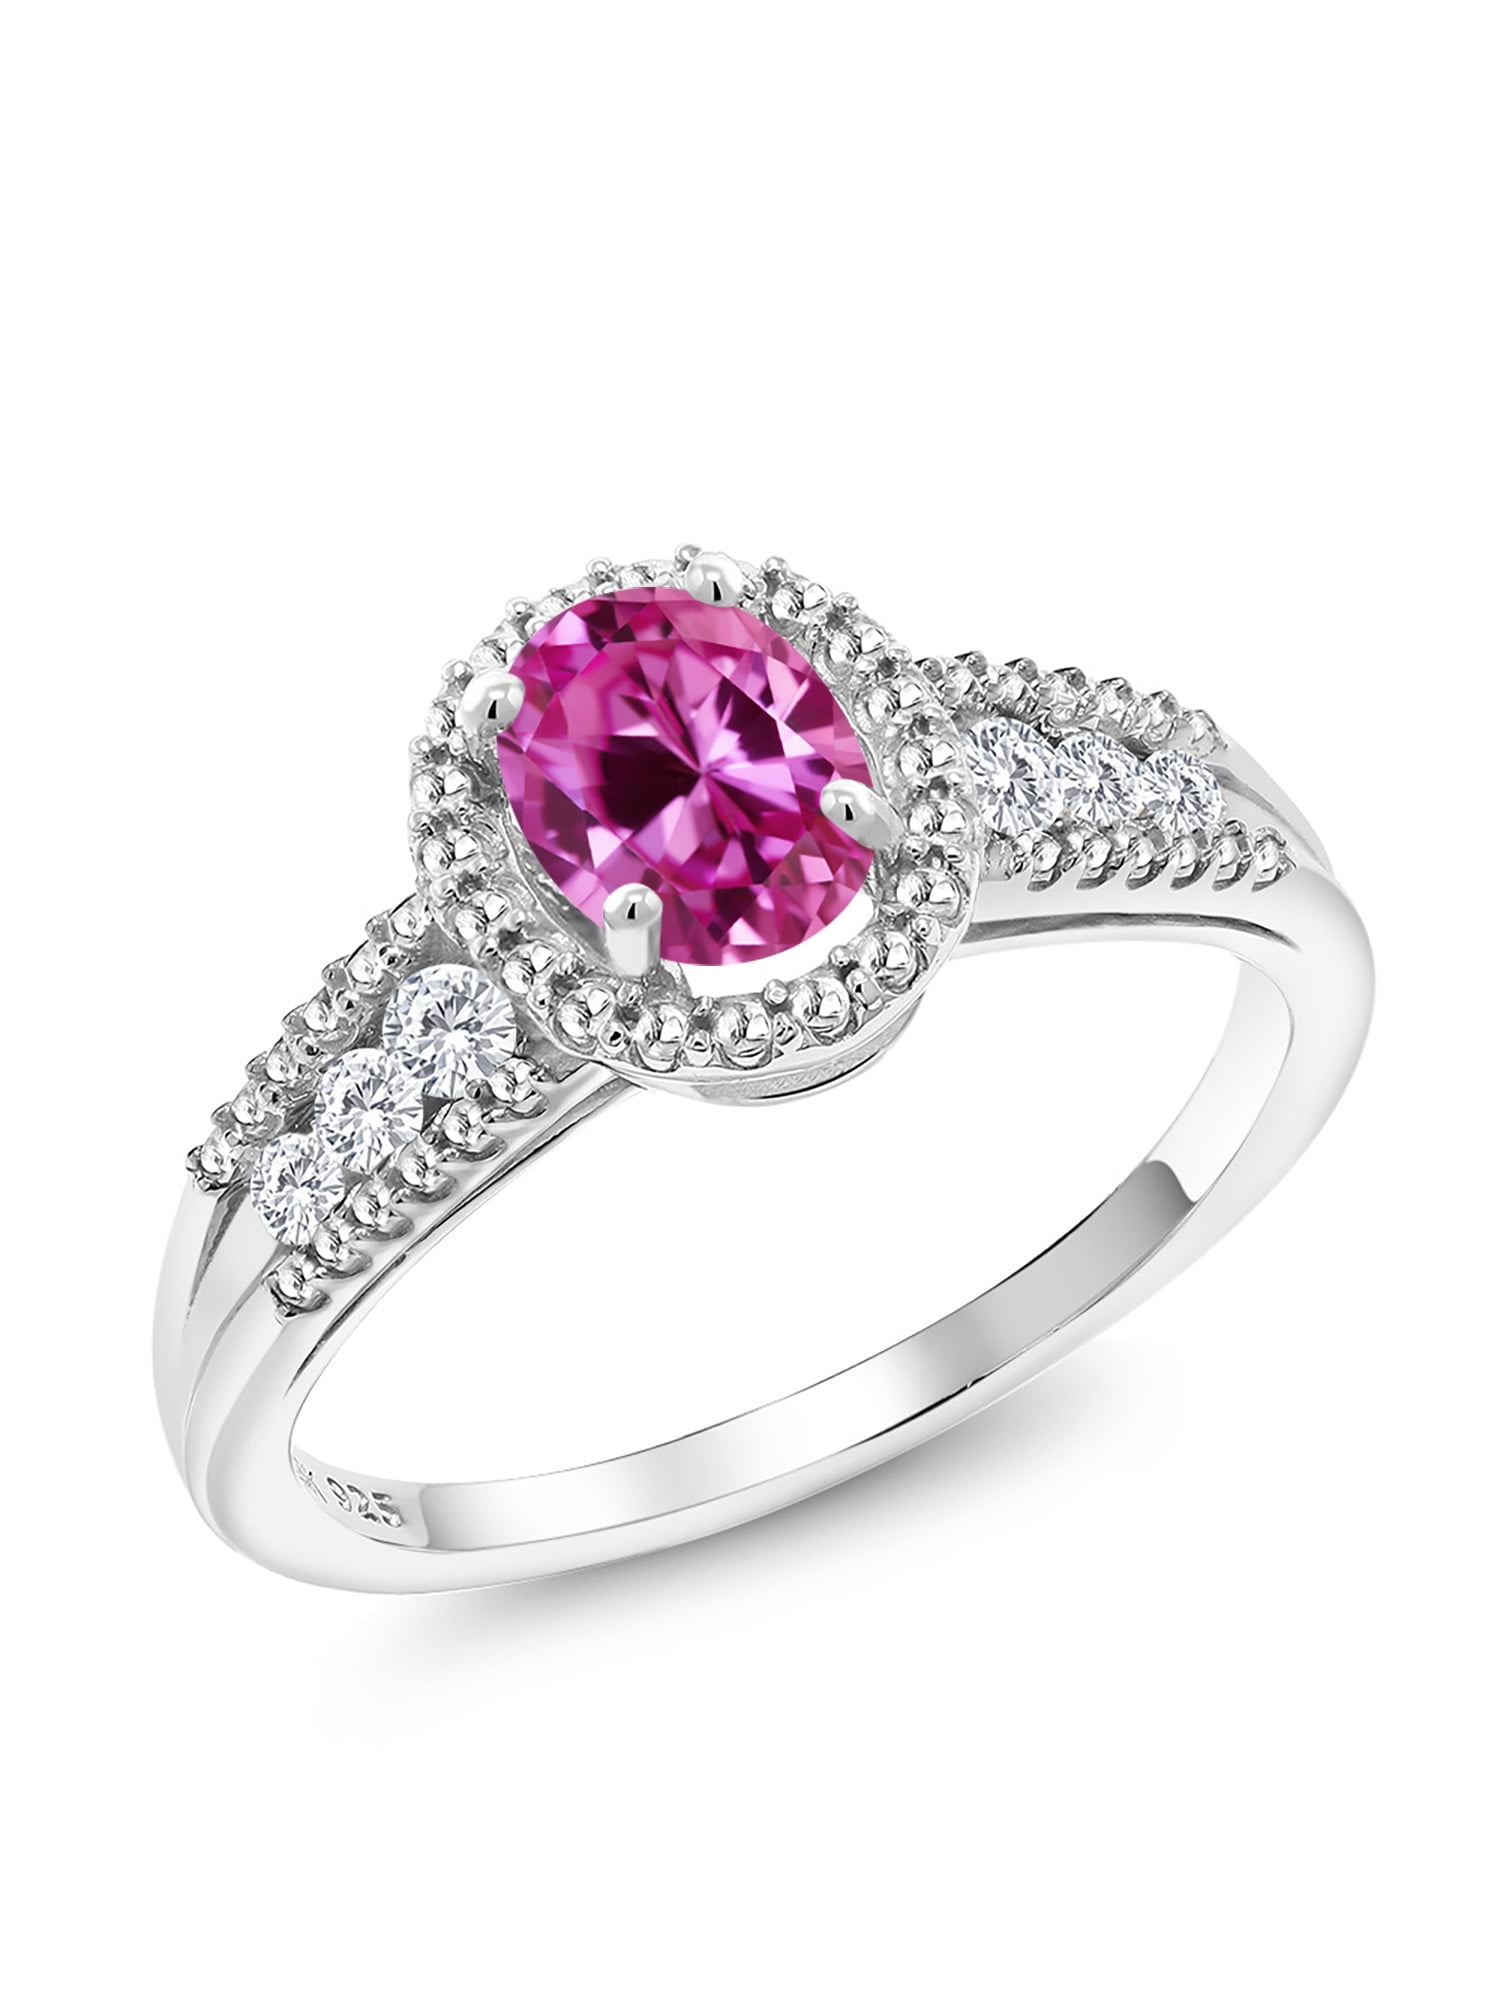 Gem Stone King 1.00 Ct Oval Pink Created Sapphire 925 Yellow Gold Plated Silver Ring